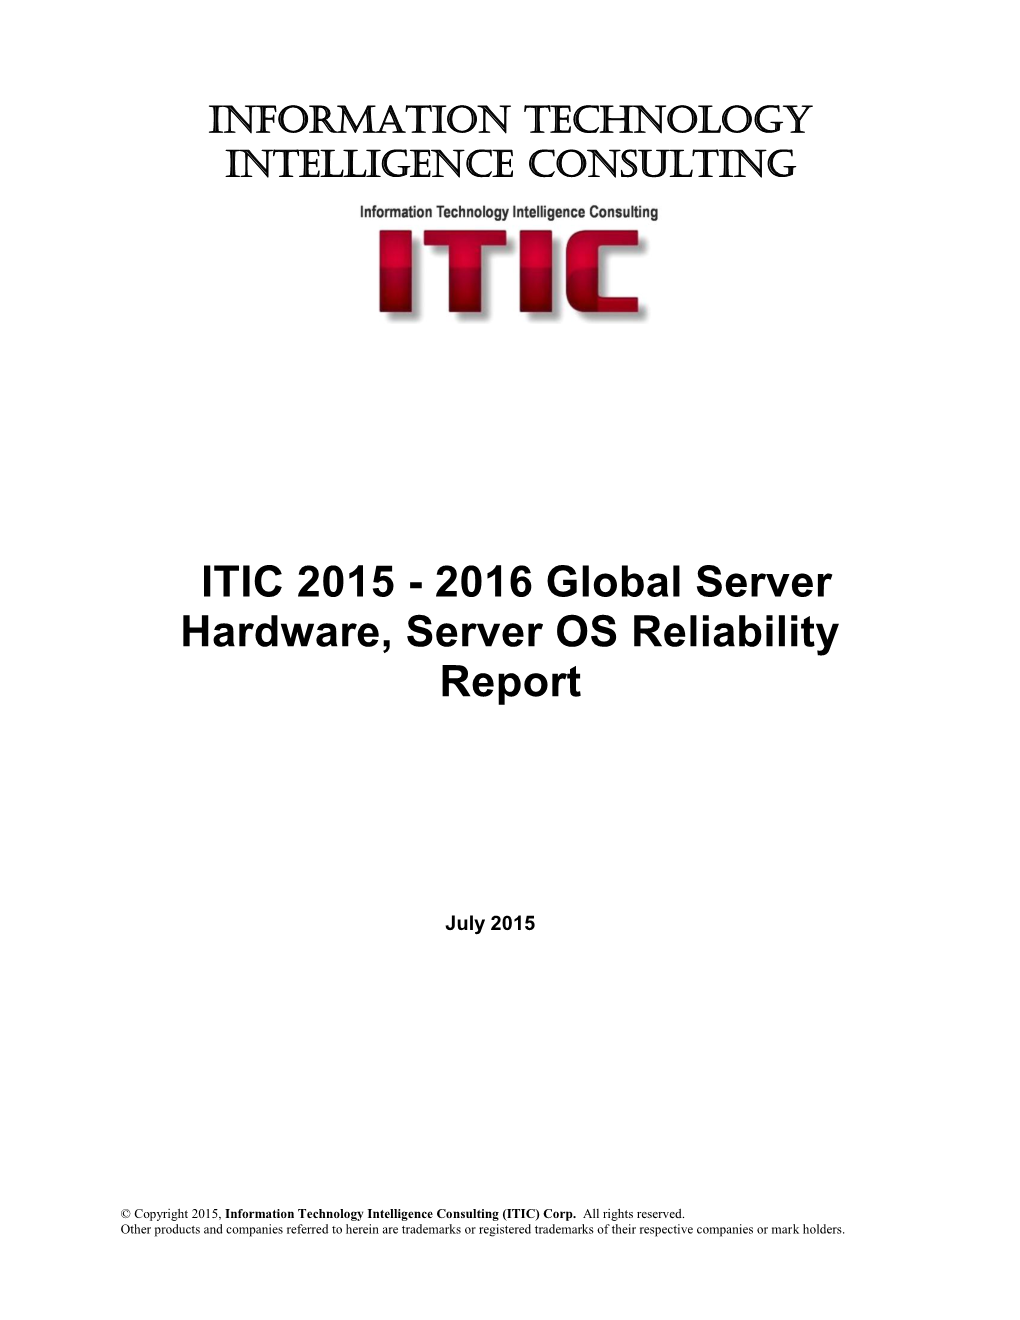 ITIC 2015 - 2016 Global Server Hardware, Server OS Reliability Report